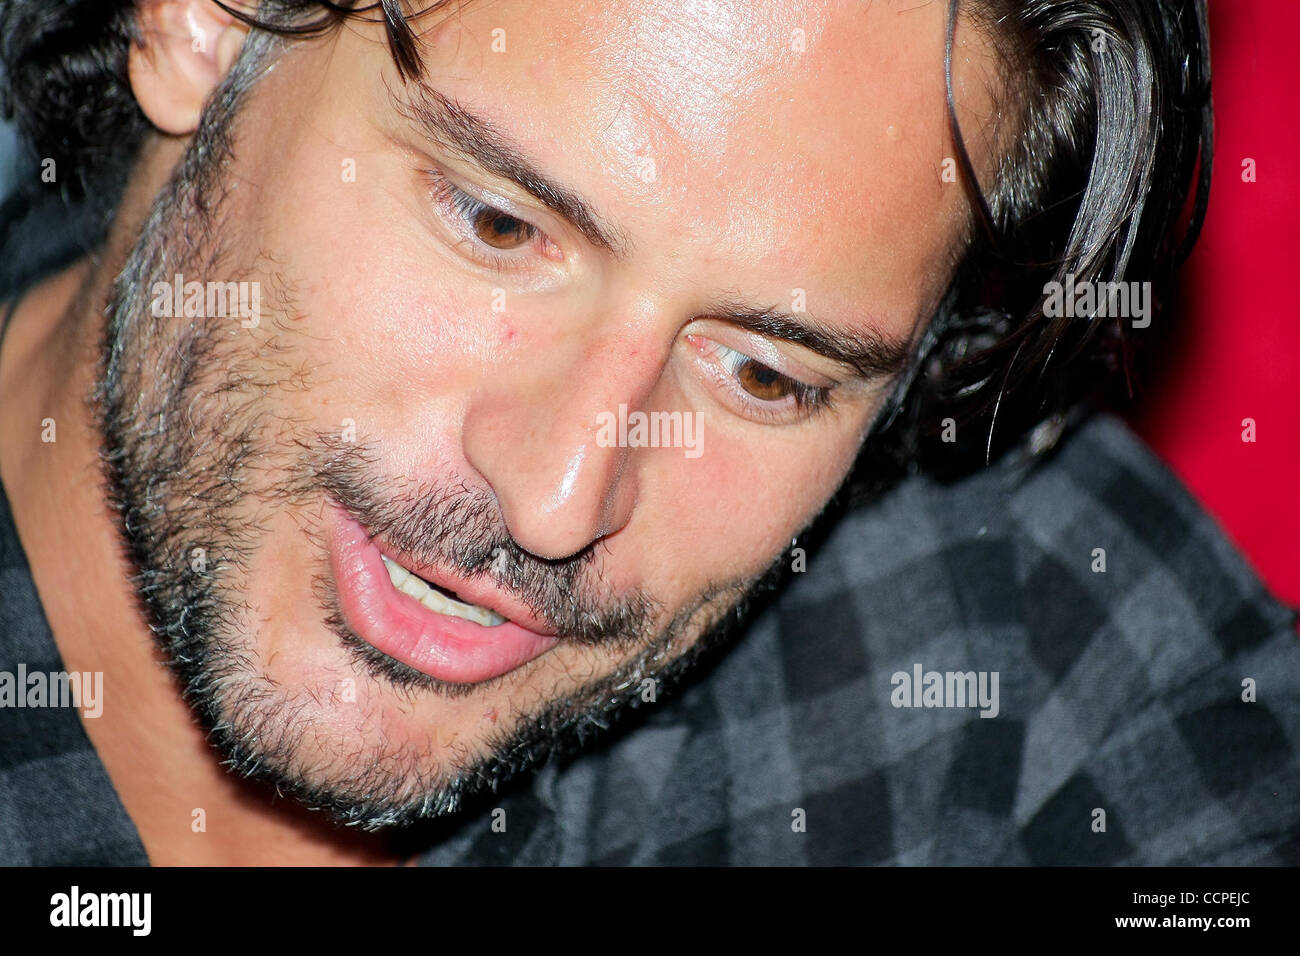 Oct. 17, 2010 - Coconut Creek, Florida, United States of America - True Blood cast member Joe Manganiello at the meet and greet with fans October 16, 2010 at the Seminole Casino Coconut Creek in Coconut Creek, Florida (Credit Image: © Aaron Gilbert/Southcreek Global/ZUMApress.com) Stock Photo